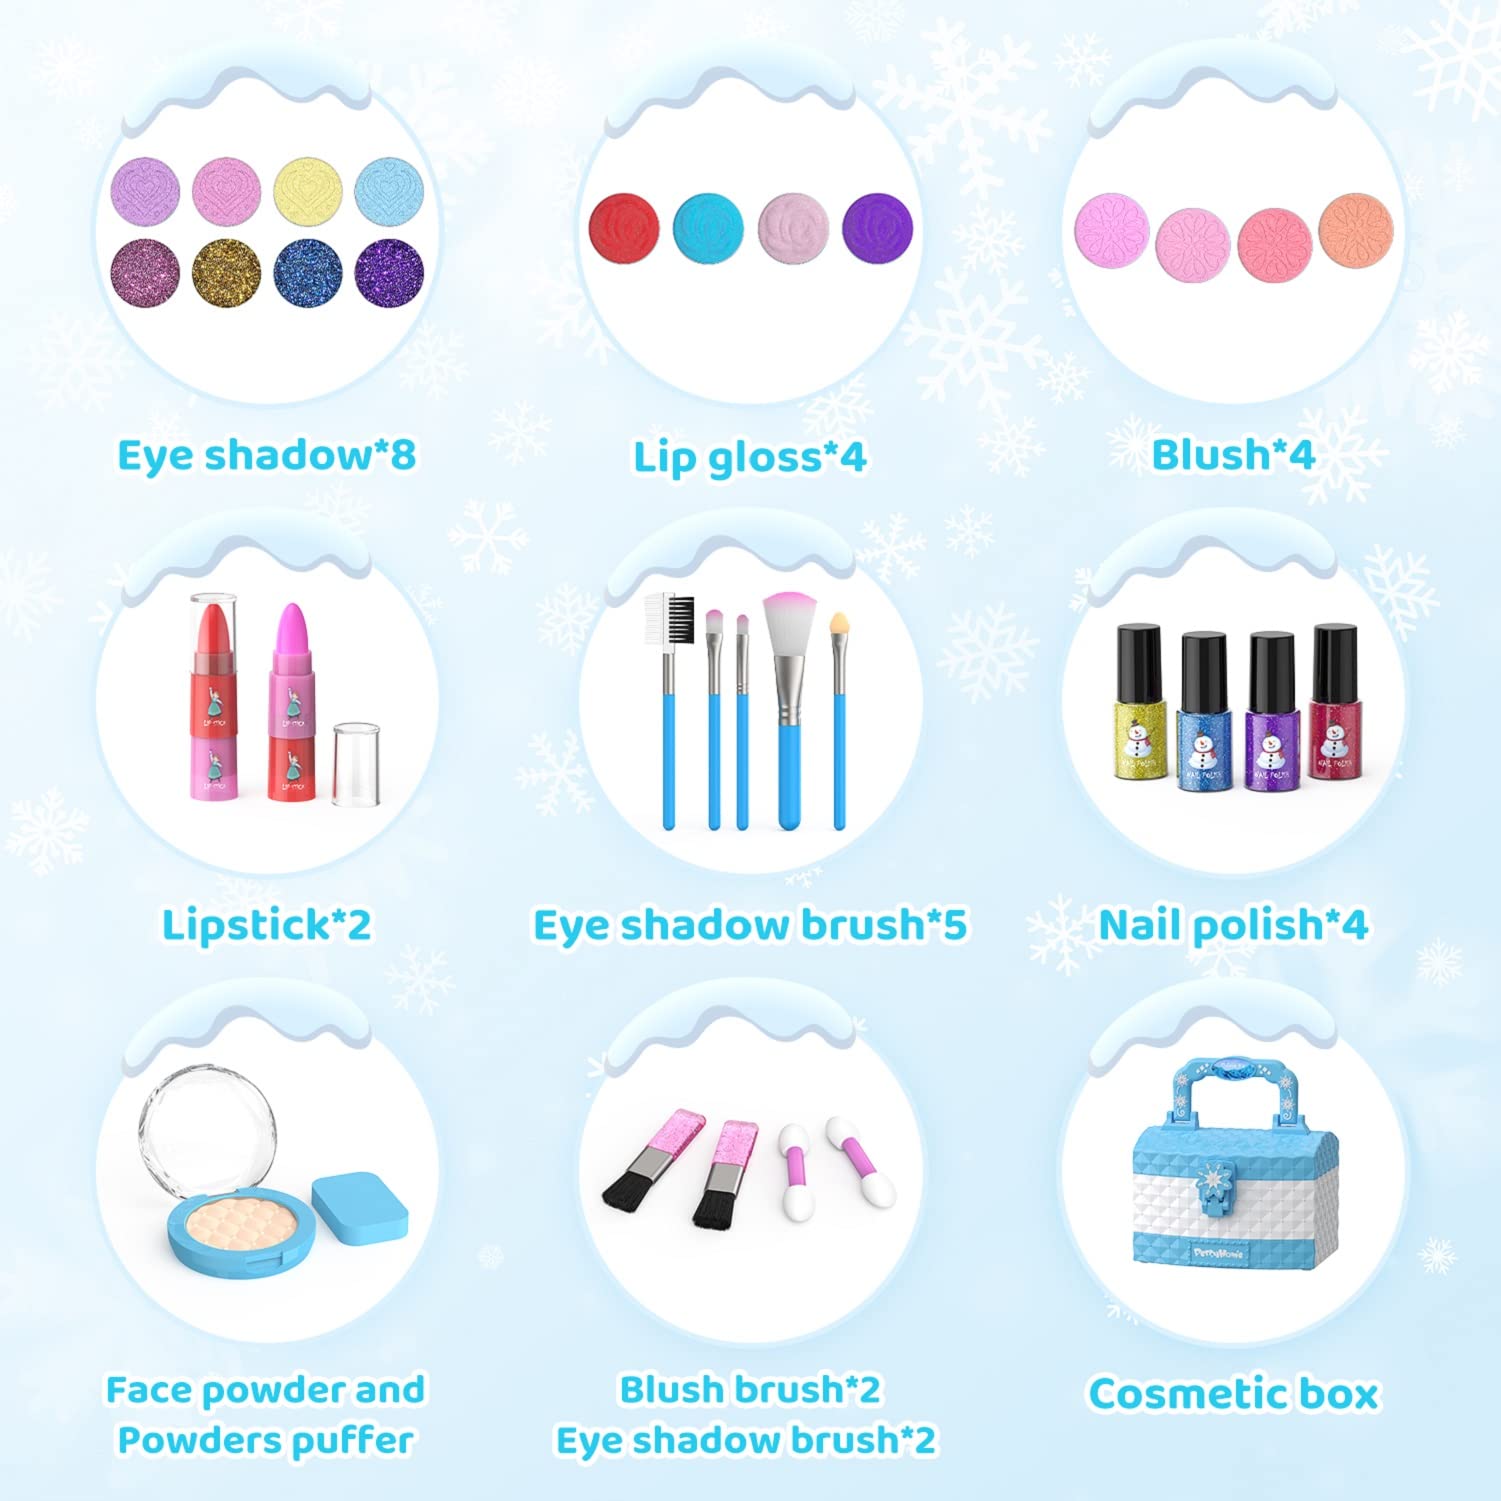 PERRYHOME Kids Makeup Kit for Girl 35 Pcs Washable Real Cosmetic, Safe & Non-Toxic Little Girl Makeup Set, Frozen Makeup Set for 3-12 Year Old Kids Toddler Girl Toys Birthday Gift (Soft Blue)